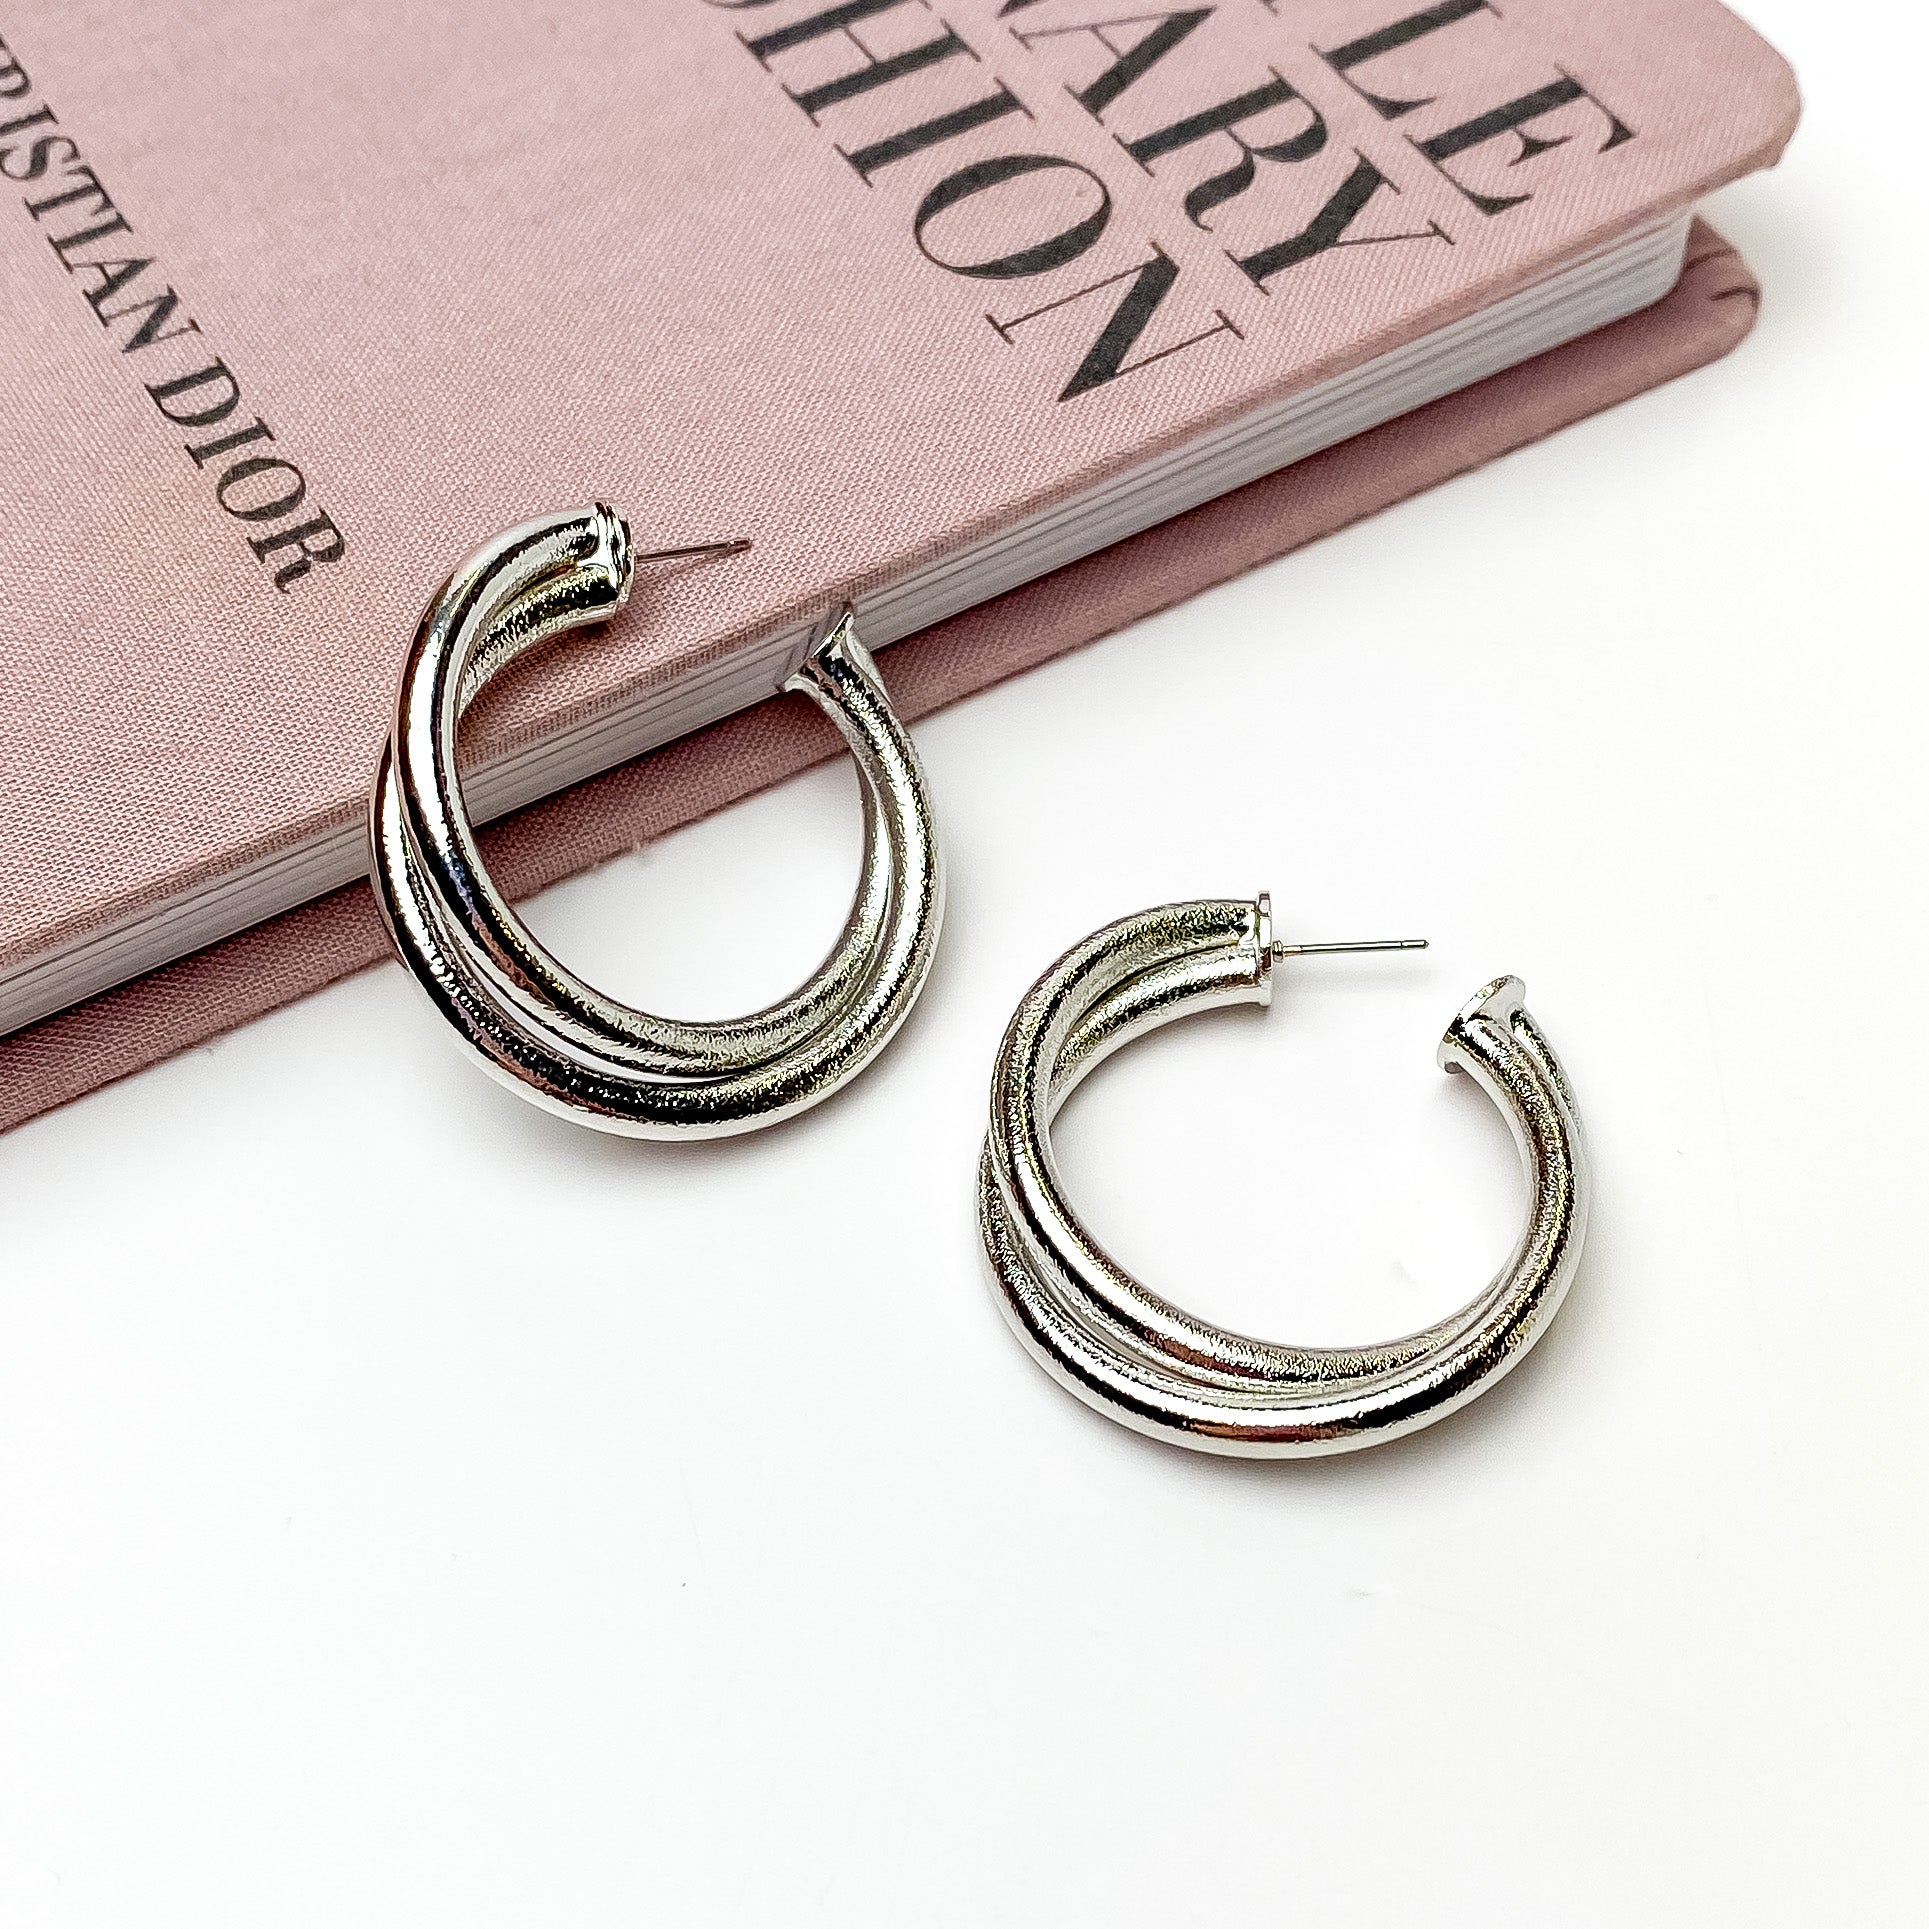 Twisted Hoop Earrings in Textured Silver Tone - Giddy Up Glamour Boutique